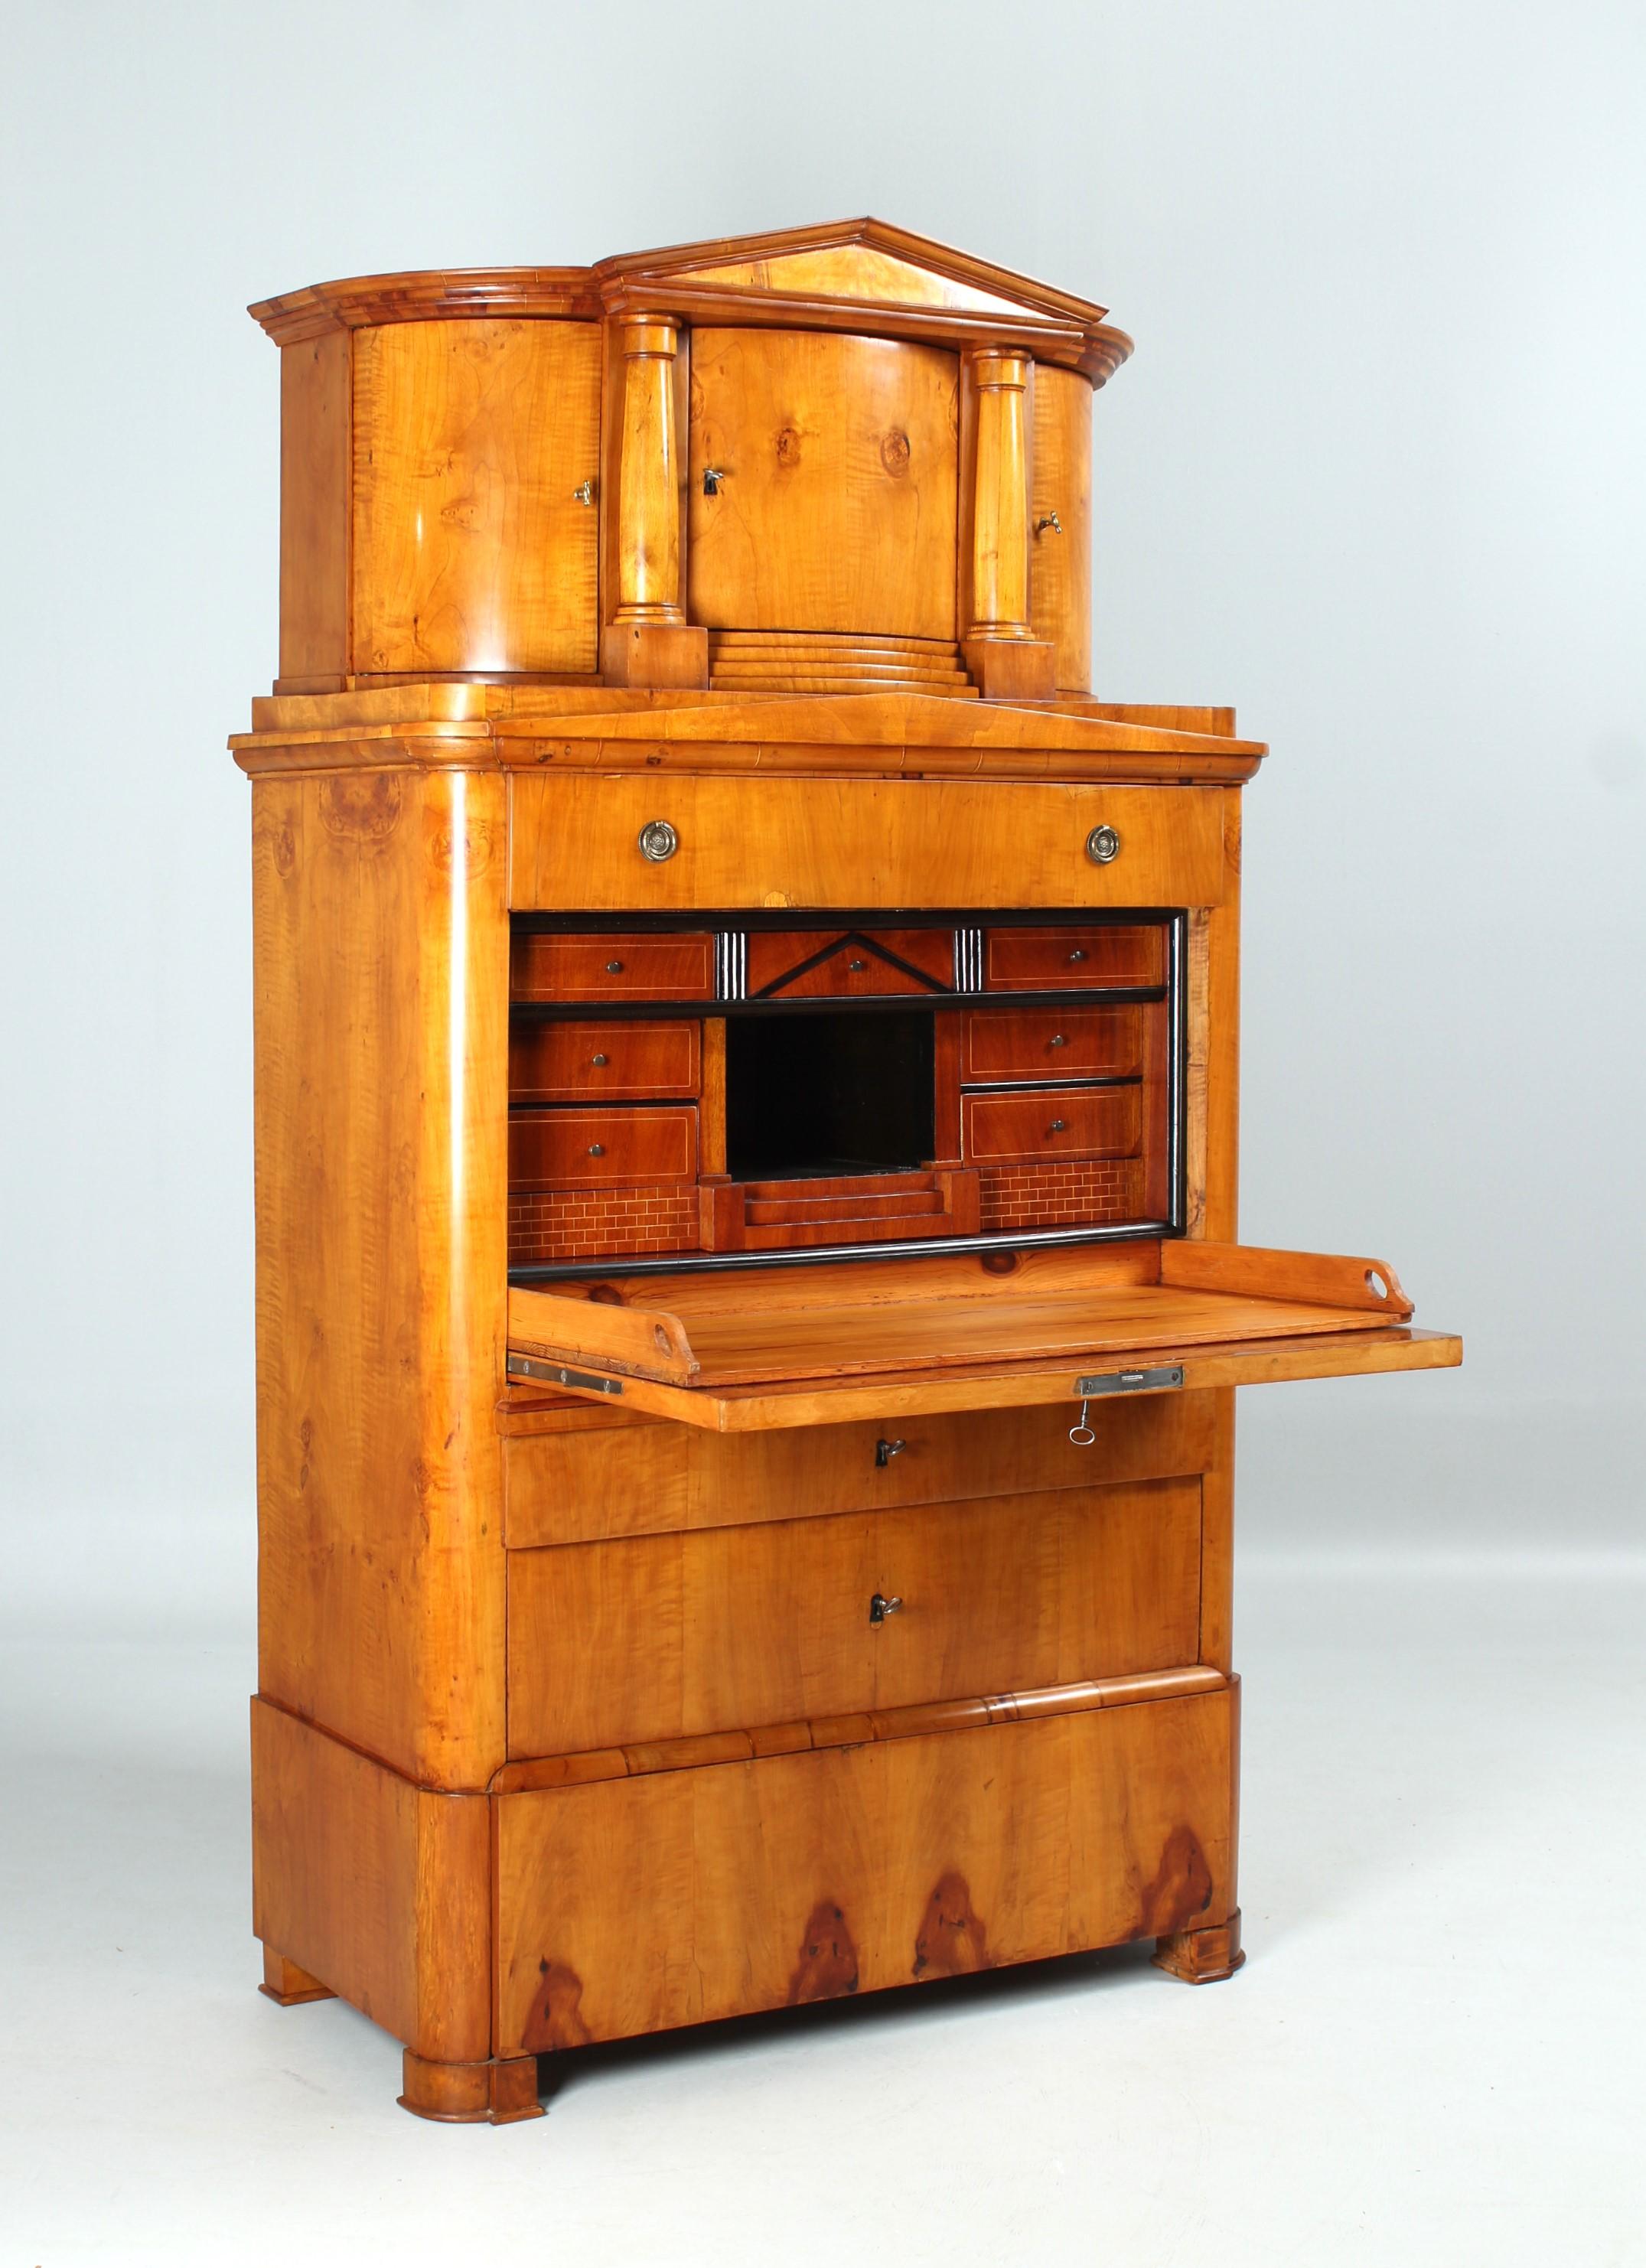 Antique top secretary from the Biedermeier period around 1830/1835.
Birch veneer with very subtle grain.

Architecturally structured interior with marquetry and band inlays. Extendable writing top in coniferous wood.

Structure with so-called